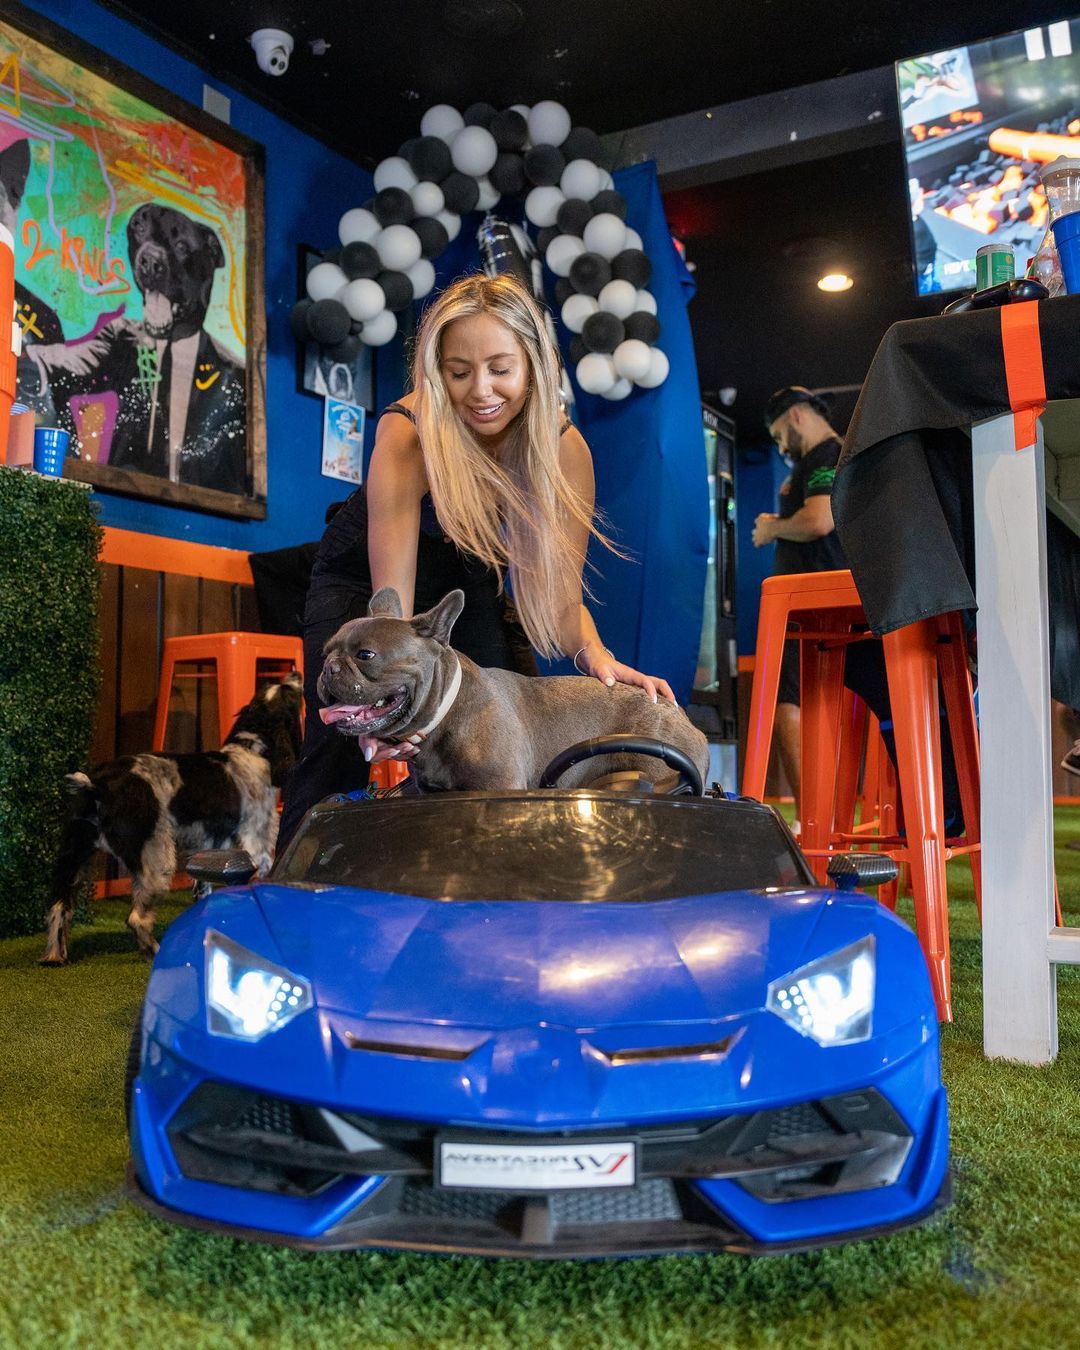 Dog on a blue toy car and owner